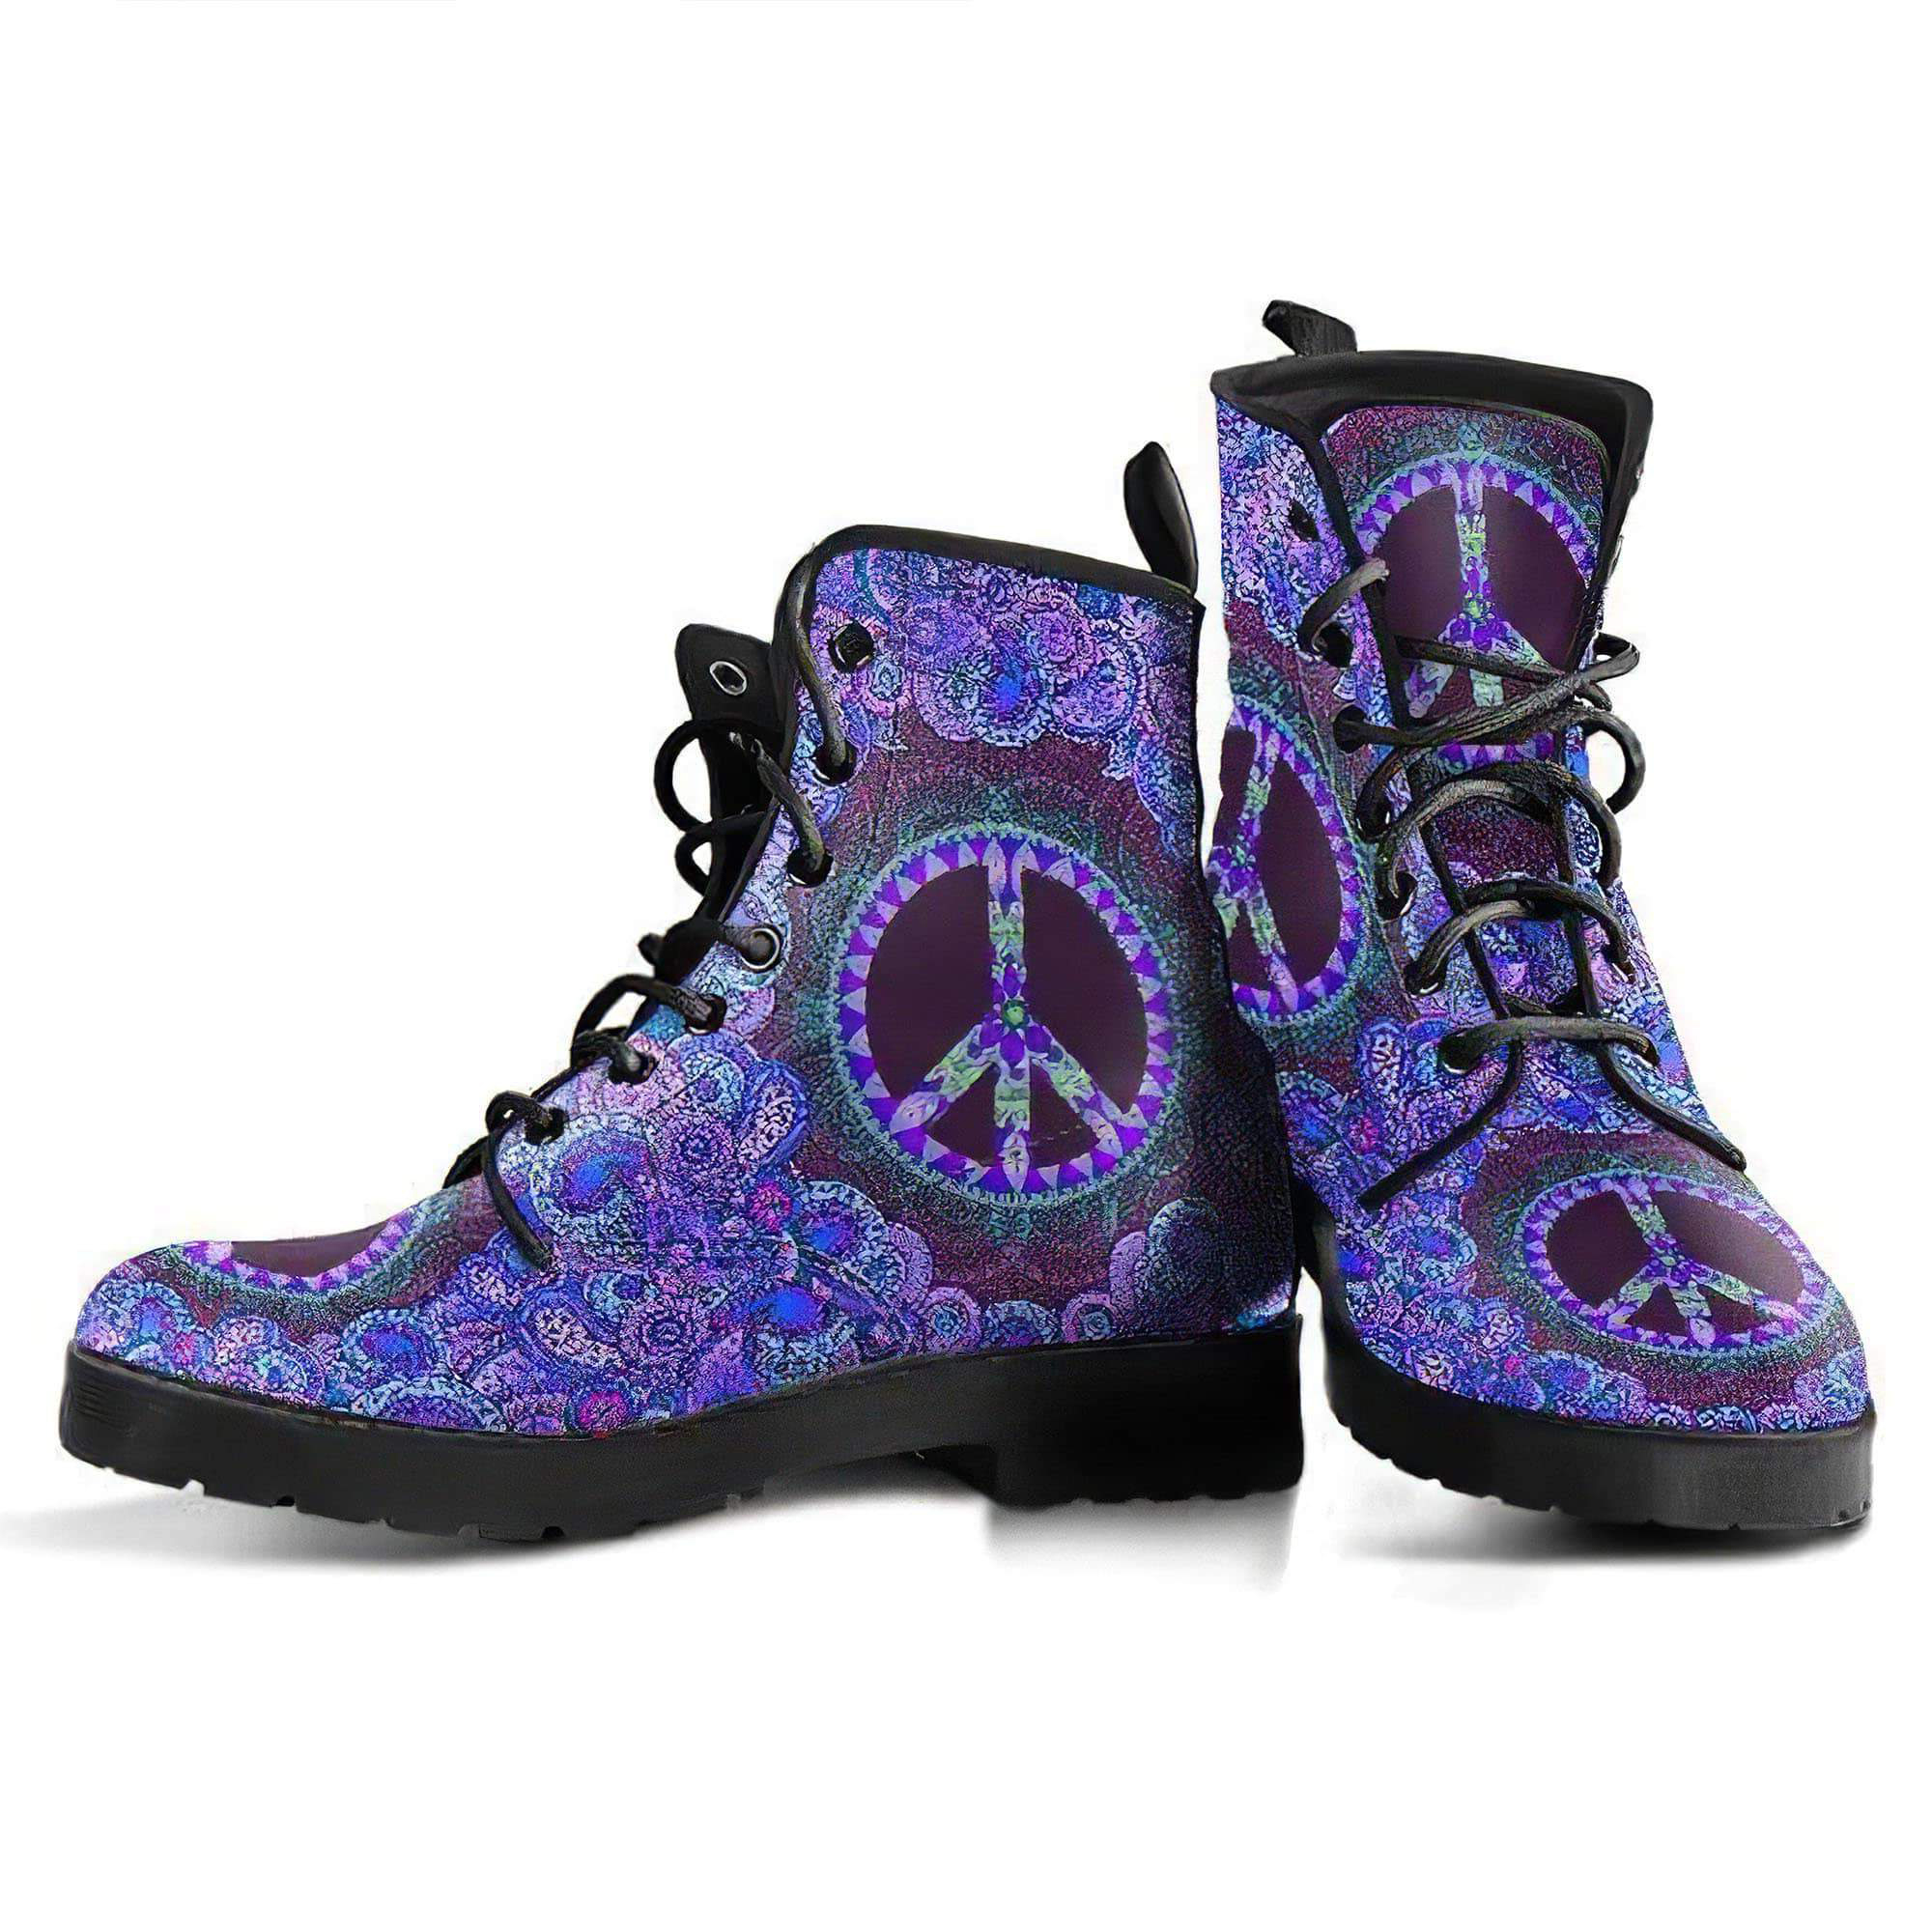 purple-peace-mandala-handcrafted-boots-women-s-leather-boots-12051939360829.jpg